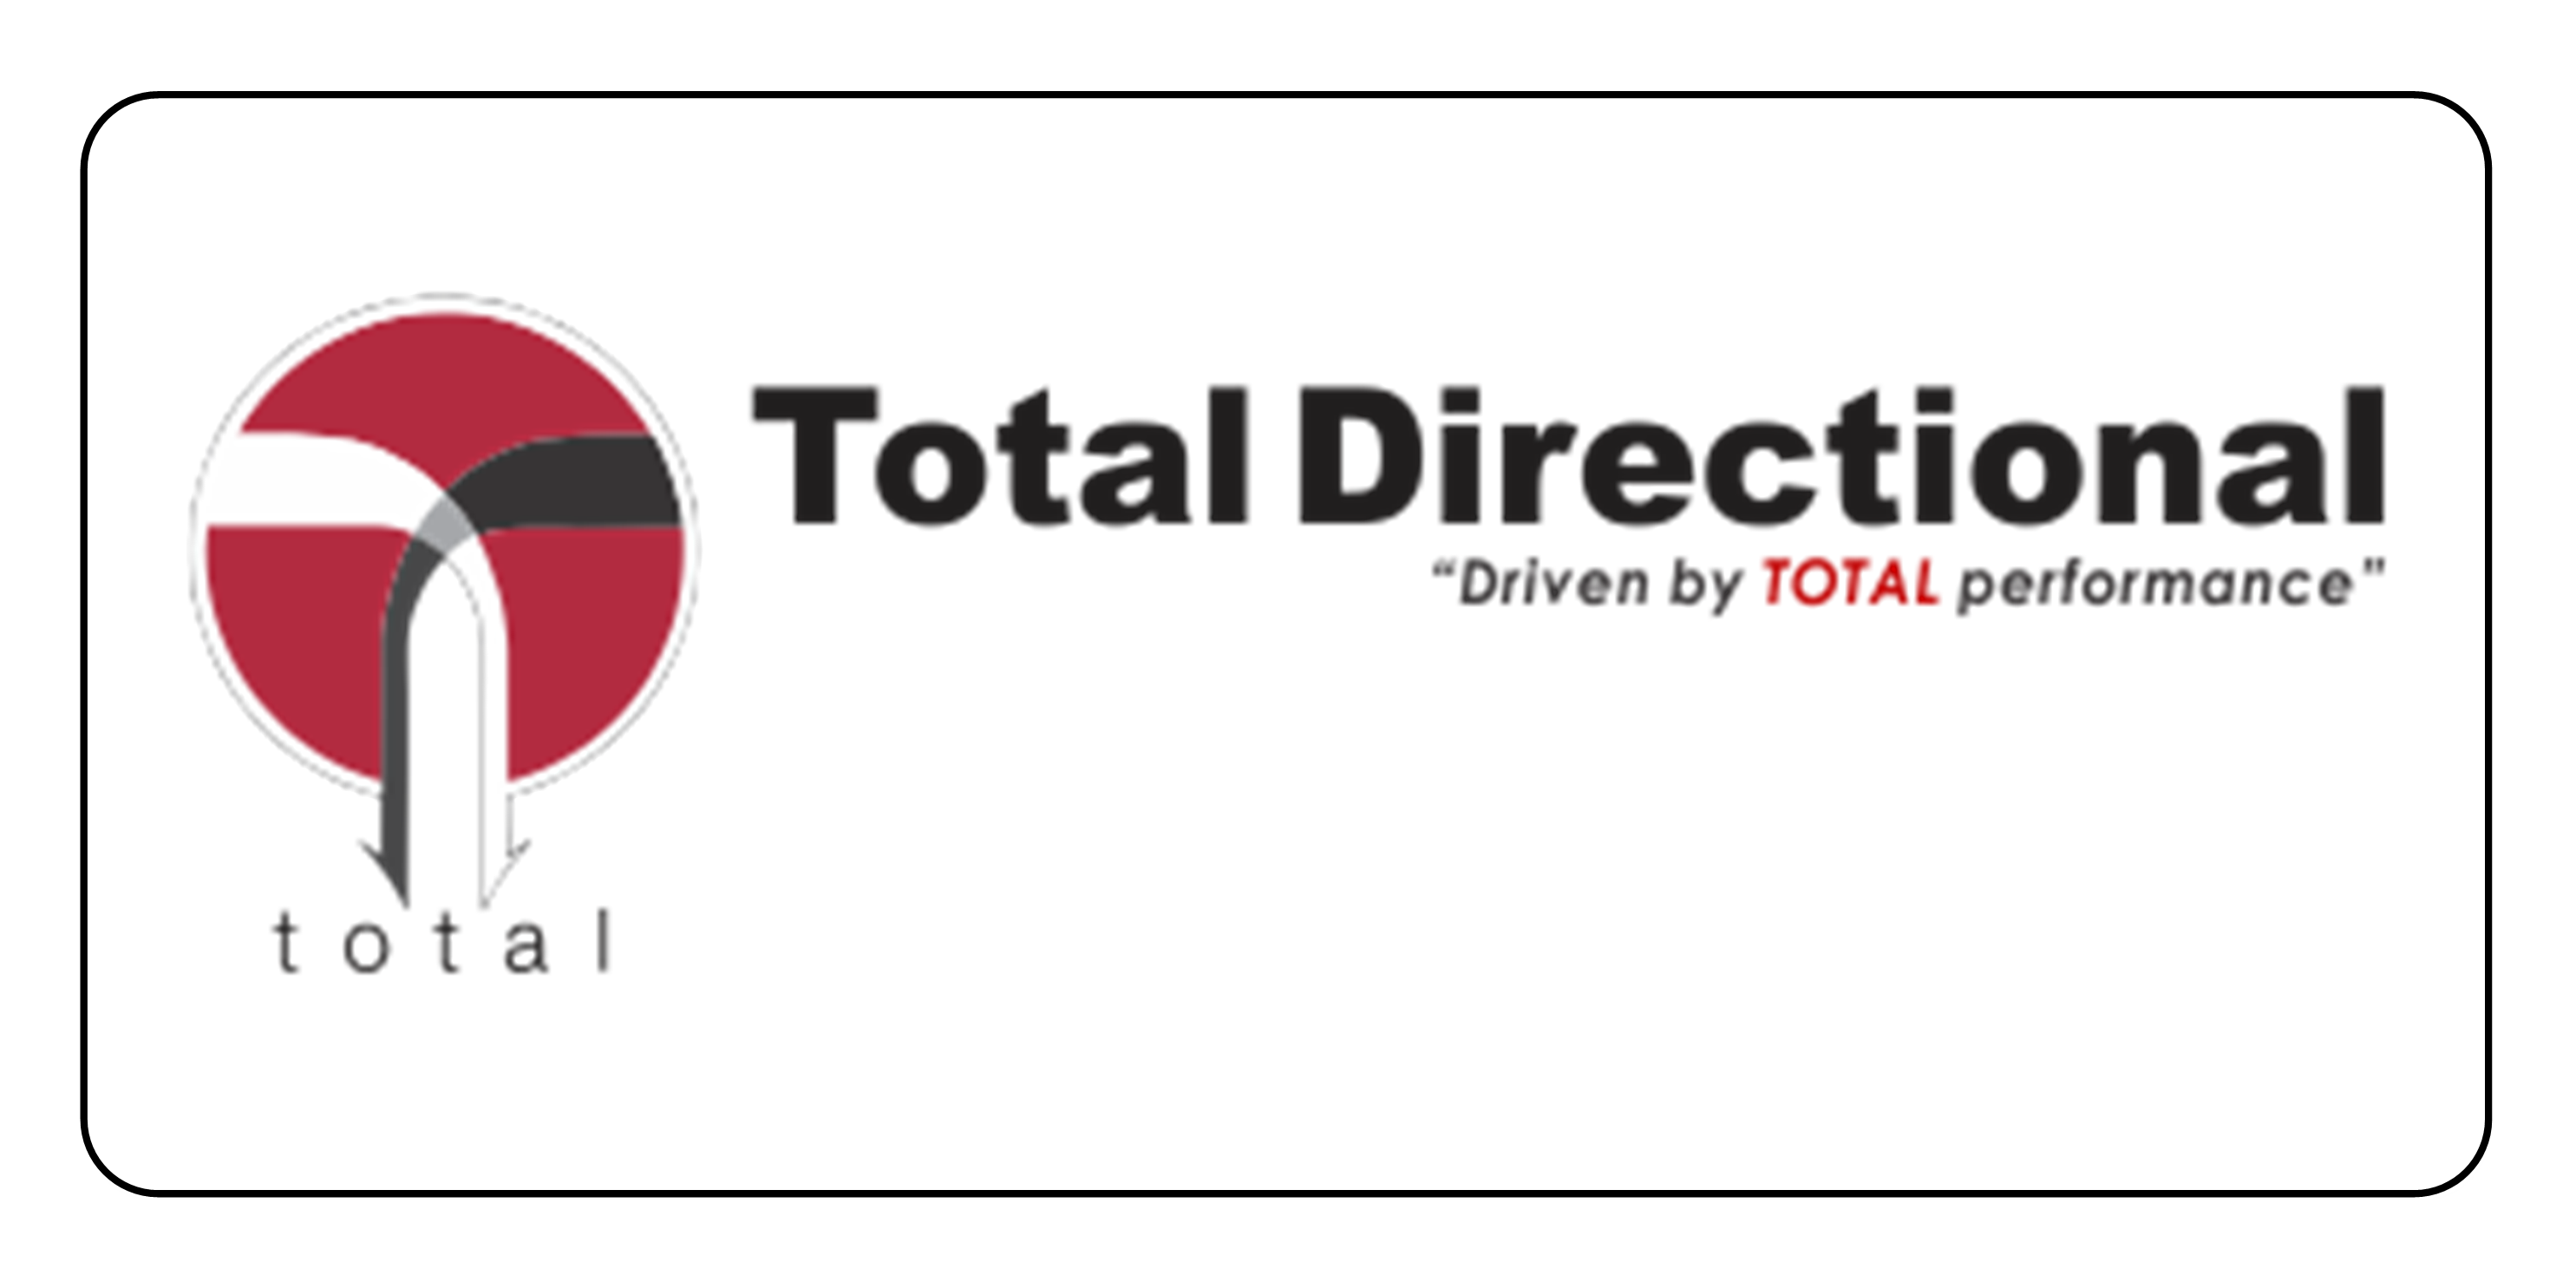 Total Directional